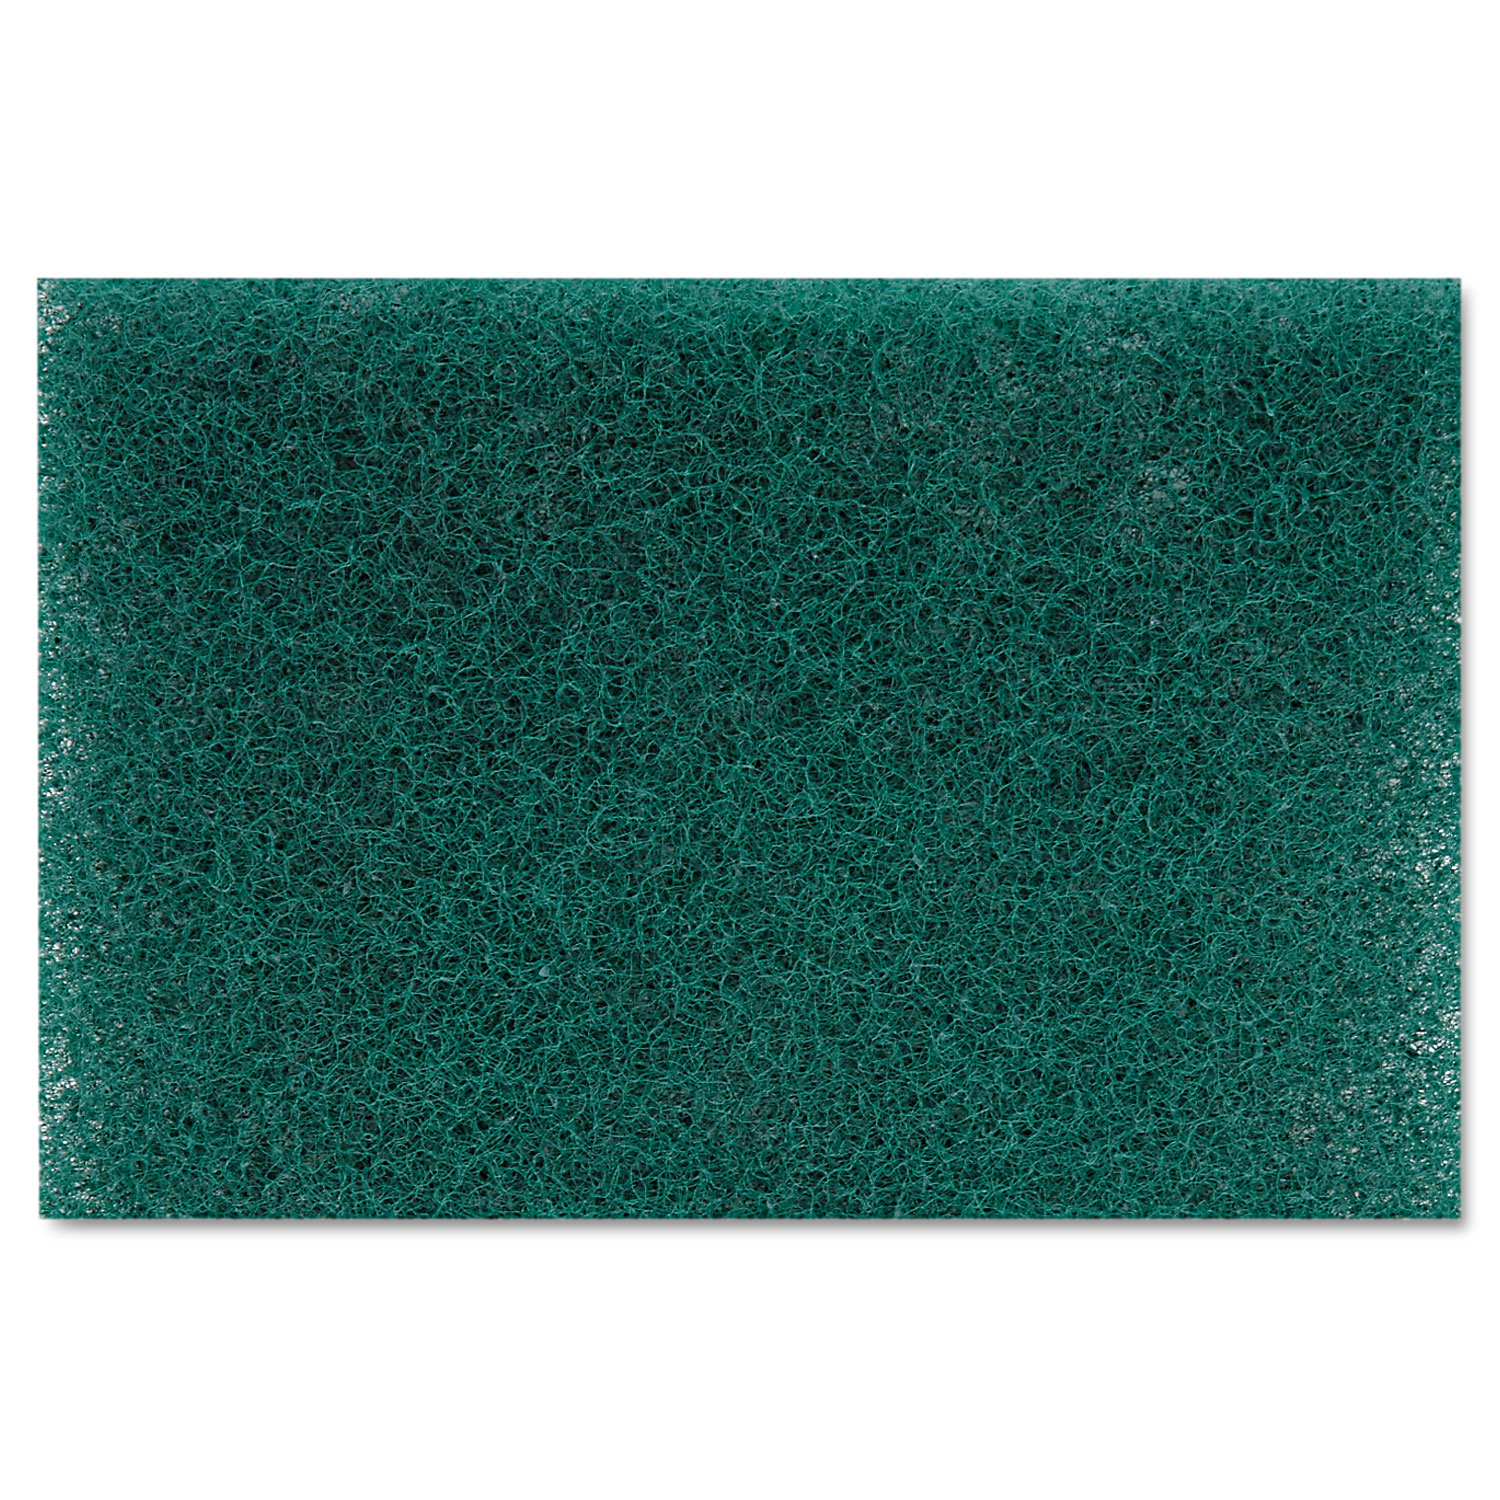 Pack of 10 Heavy Duty Professional Green Scourer Pads 6'' x 9'' 